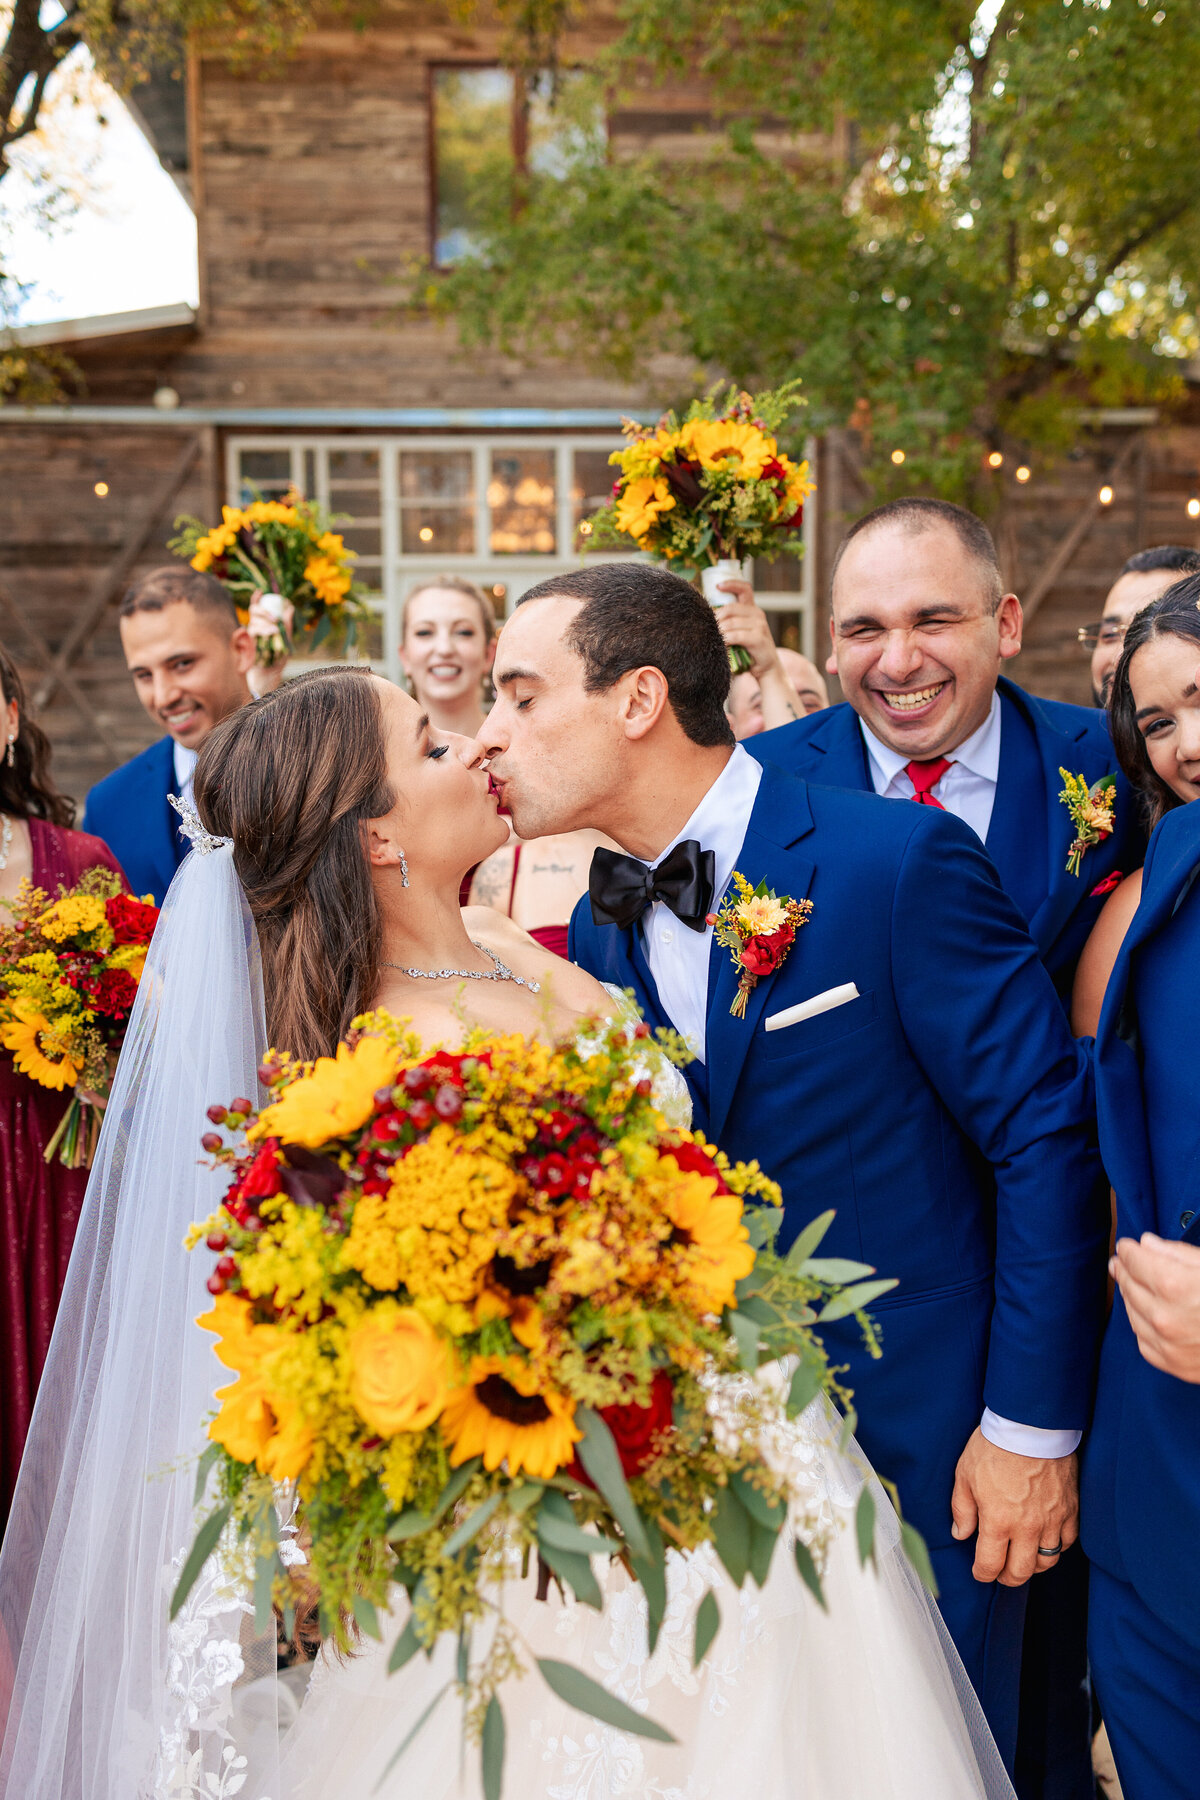 Make a splash with a bold summer wedding at Harper Hill Ranch. Sunflowers, open fields, and an upbeat dance party – your love story begins with a jump into the pool!